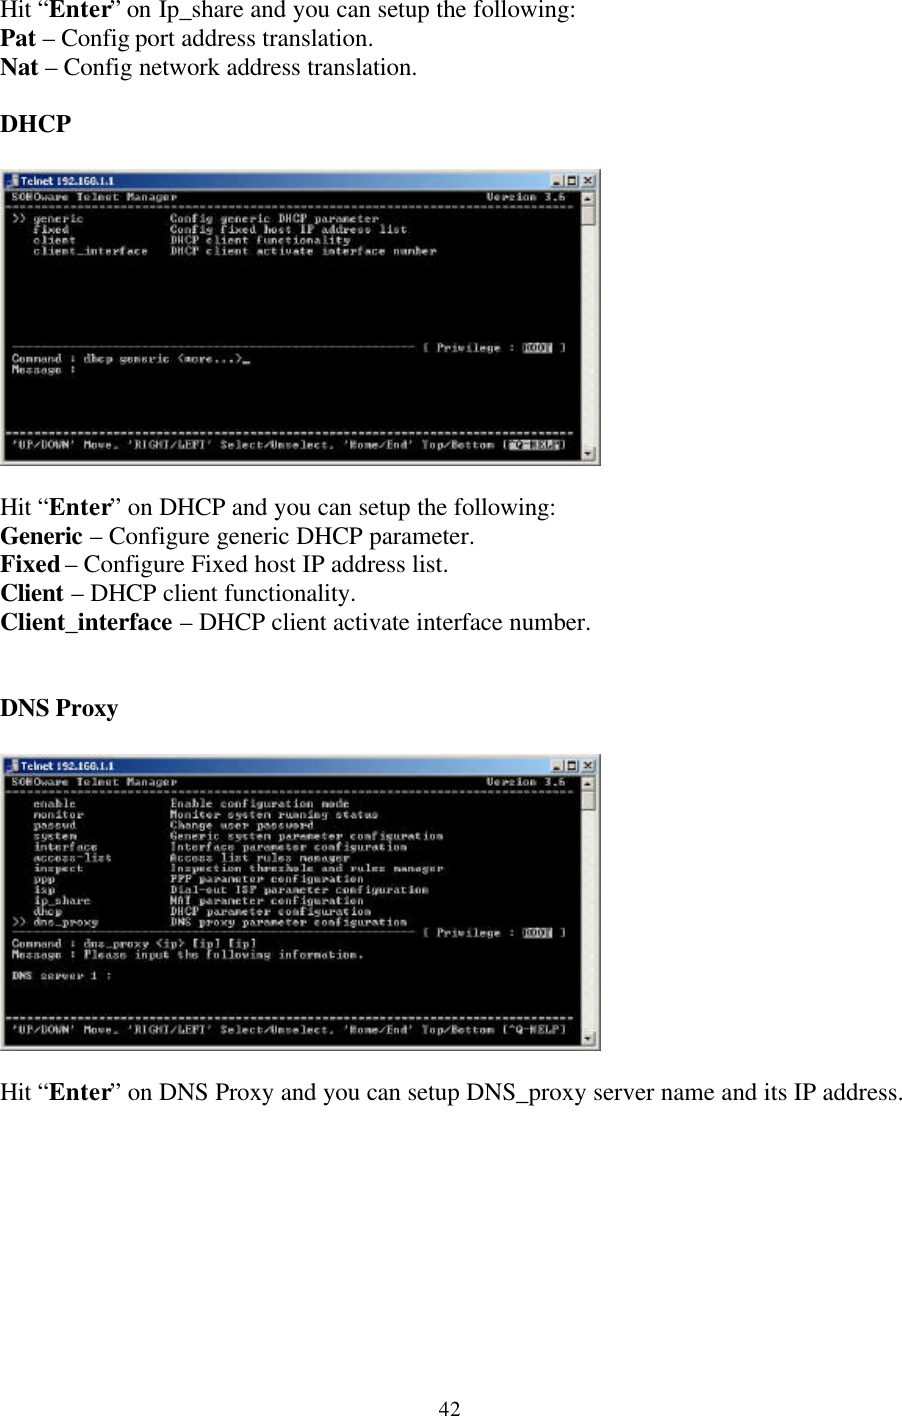 42Hit “Enter” on Ip_share and you can setup the following:Pat – Config port address translation.Nat – Config network address translation.DHCPHit “Enter” on DHCP and you can setup the following:Generic – Configure generic DHCP parameter.Fixed – Configure Fixed host IP address list.Client – DHCP client functionality.Client_interface – DHCP client activate interface number.DNS ProxyHit “Enter” on DNS Proxy and you can setup DNS_proxy server name and its IP address.